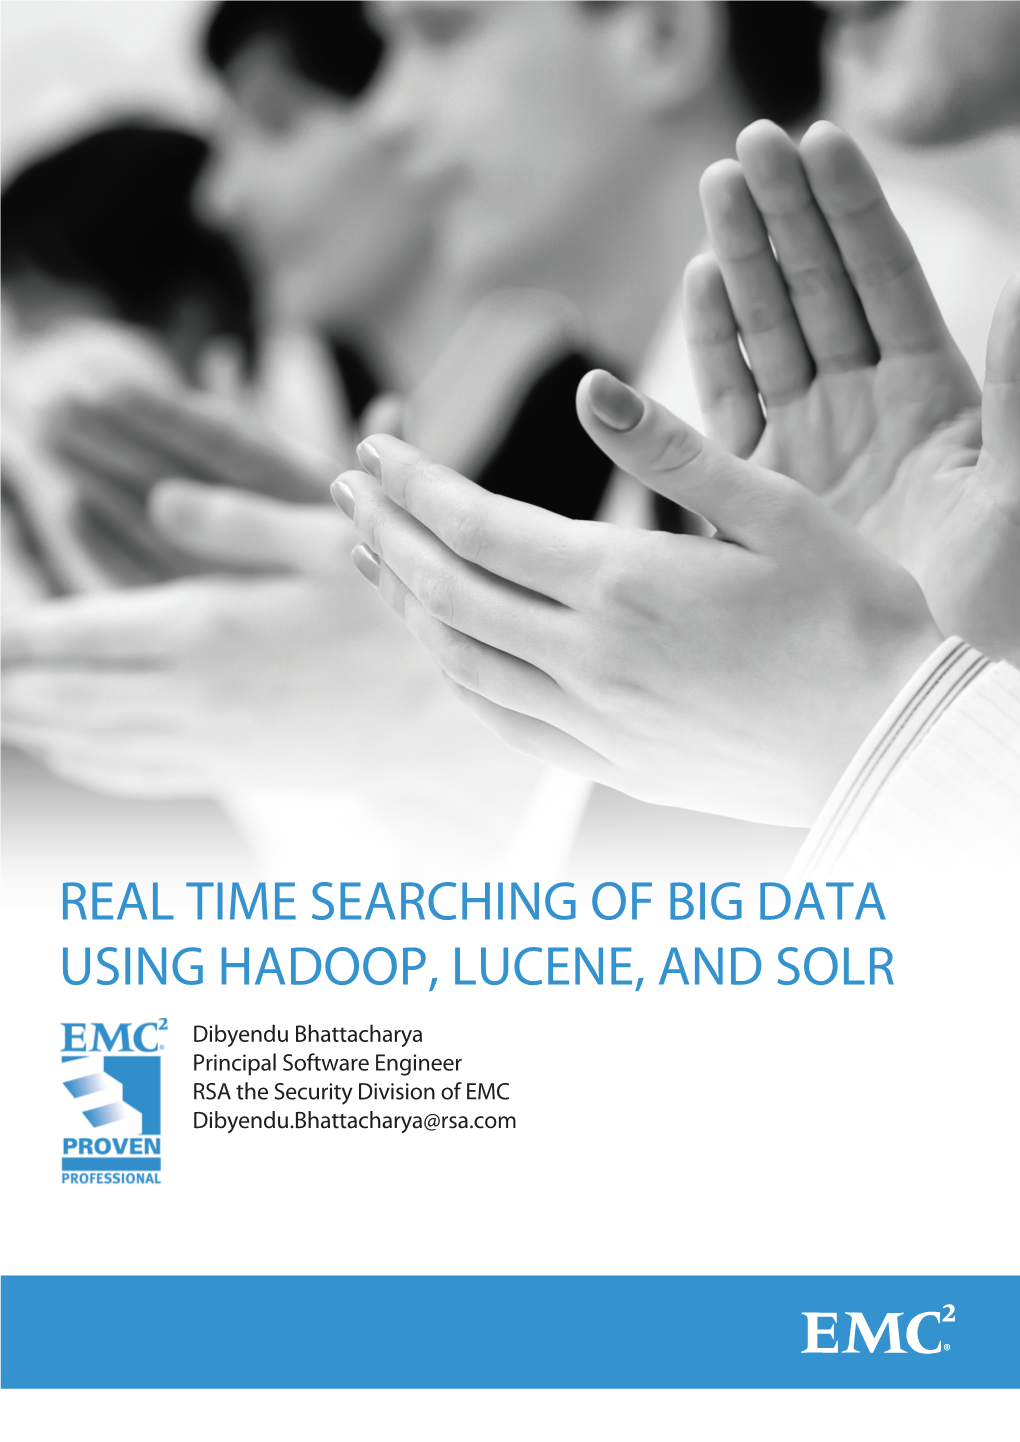 Real Time Searching of Big Data Using Hadoop, Lucene, and Solr